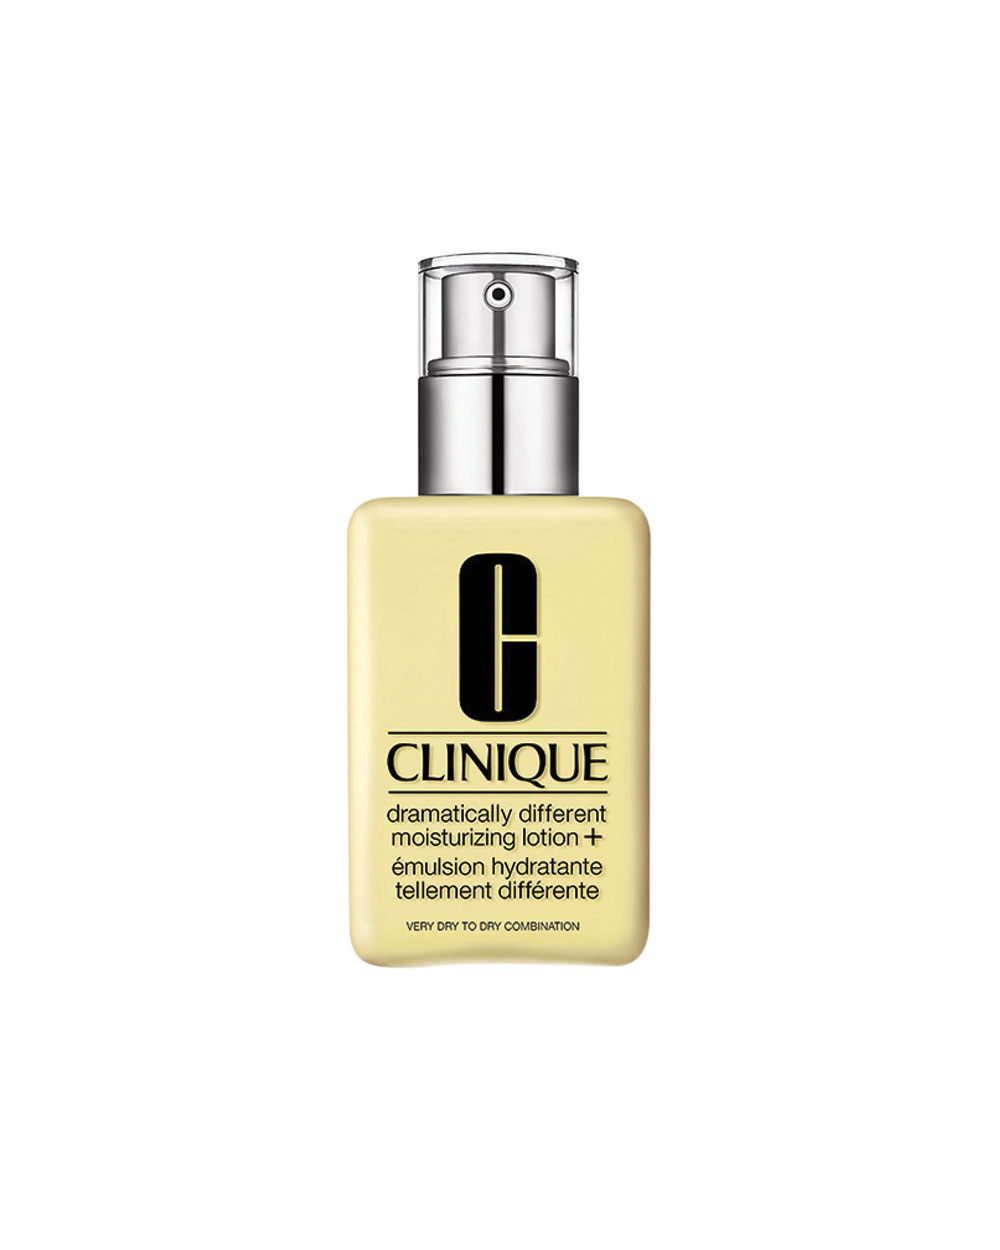 Tall glass of water Clinique Dramatically Different Moisturizing Lotion +, $69